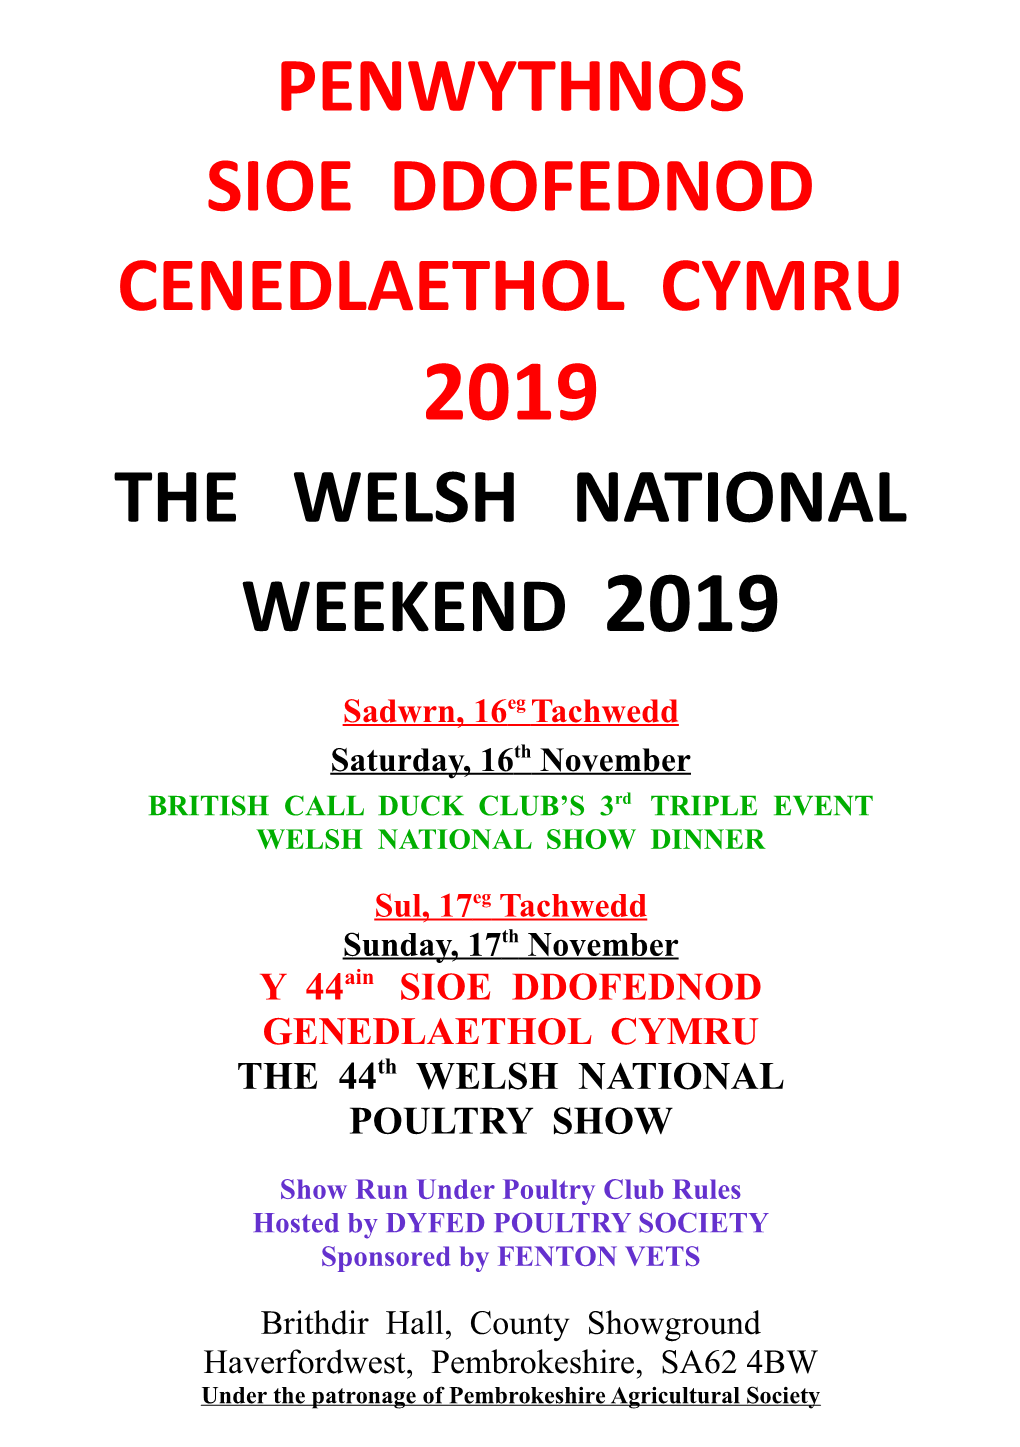 The Welsh National Weekend 2019